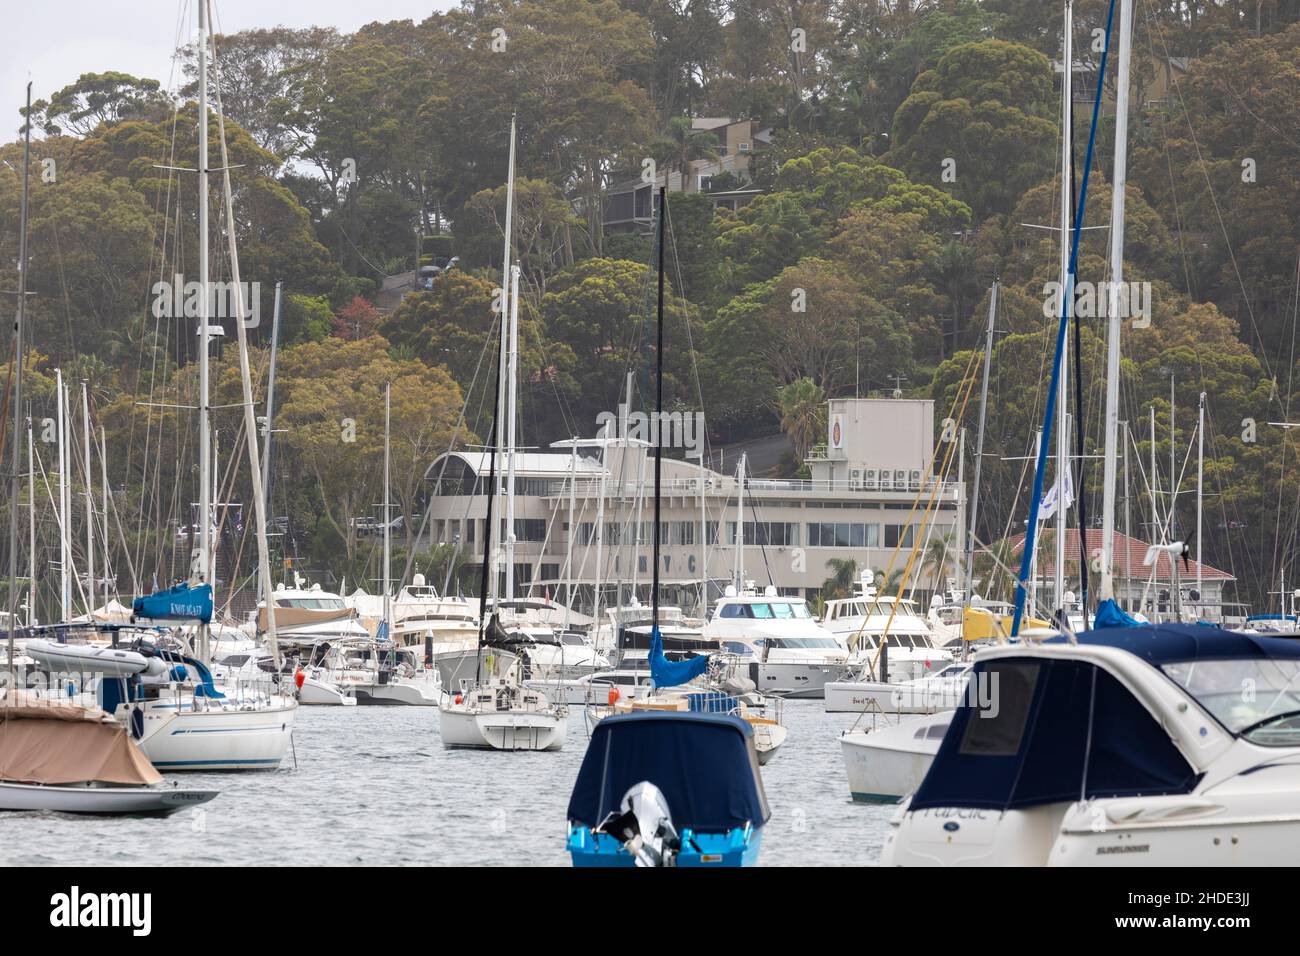 Royal Motor Yacht Club at Newport on Pittwater and boats yachts moored nearby,Sydney,NSW,Australia Stock Photo